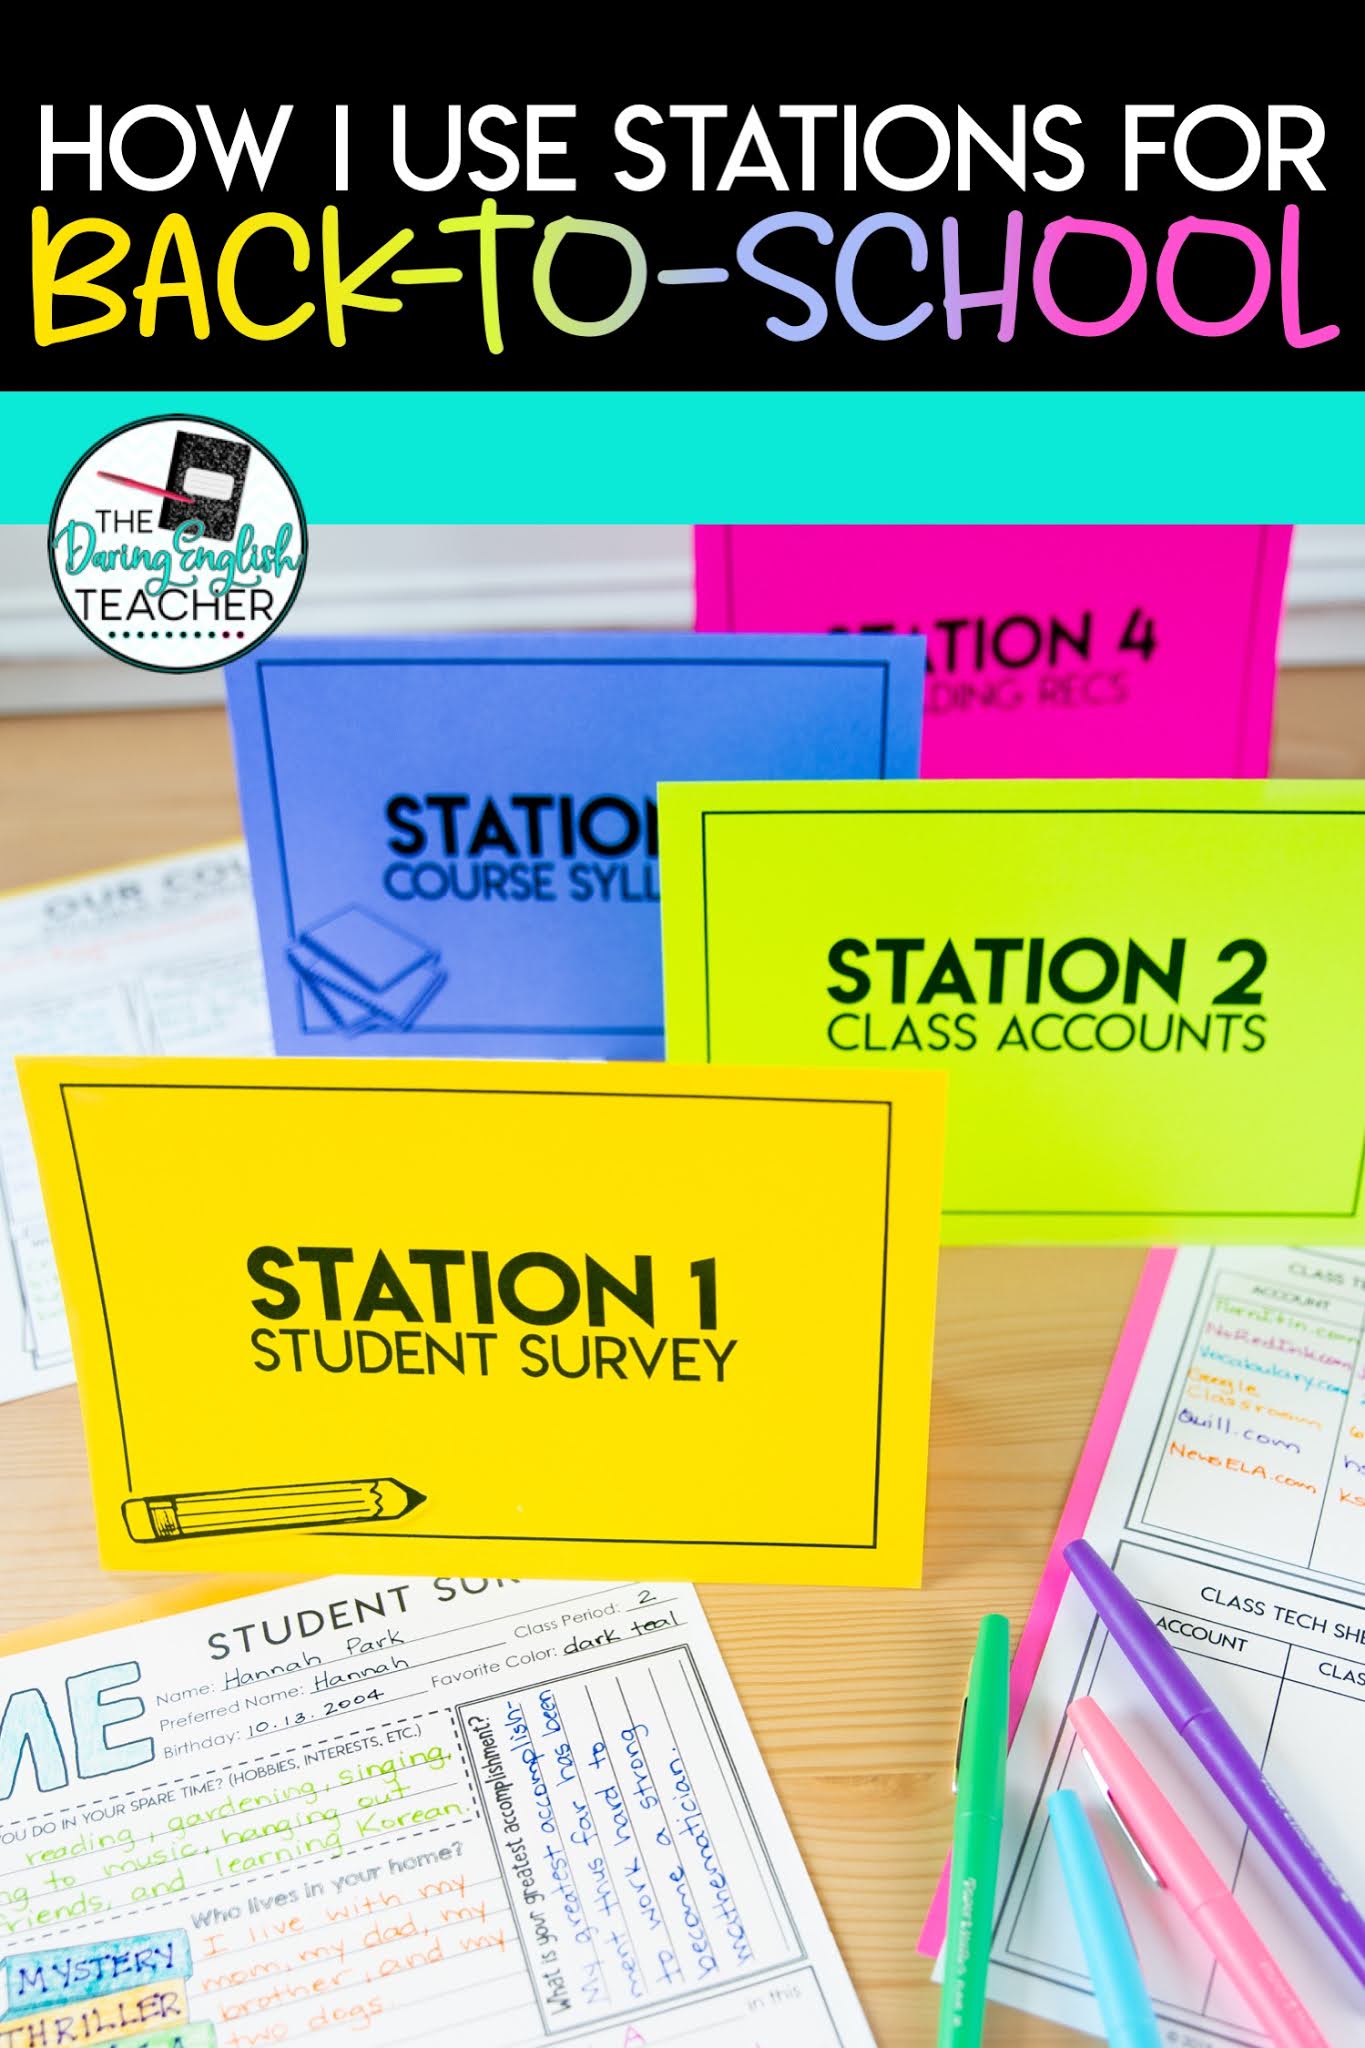 Back to school stations